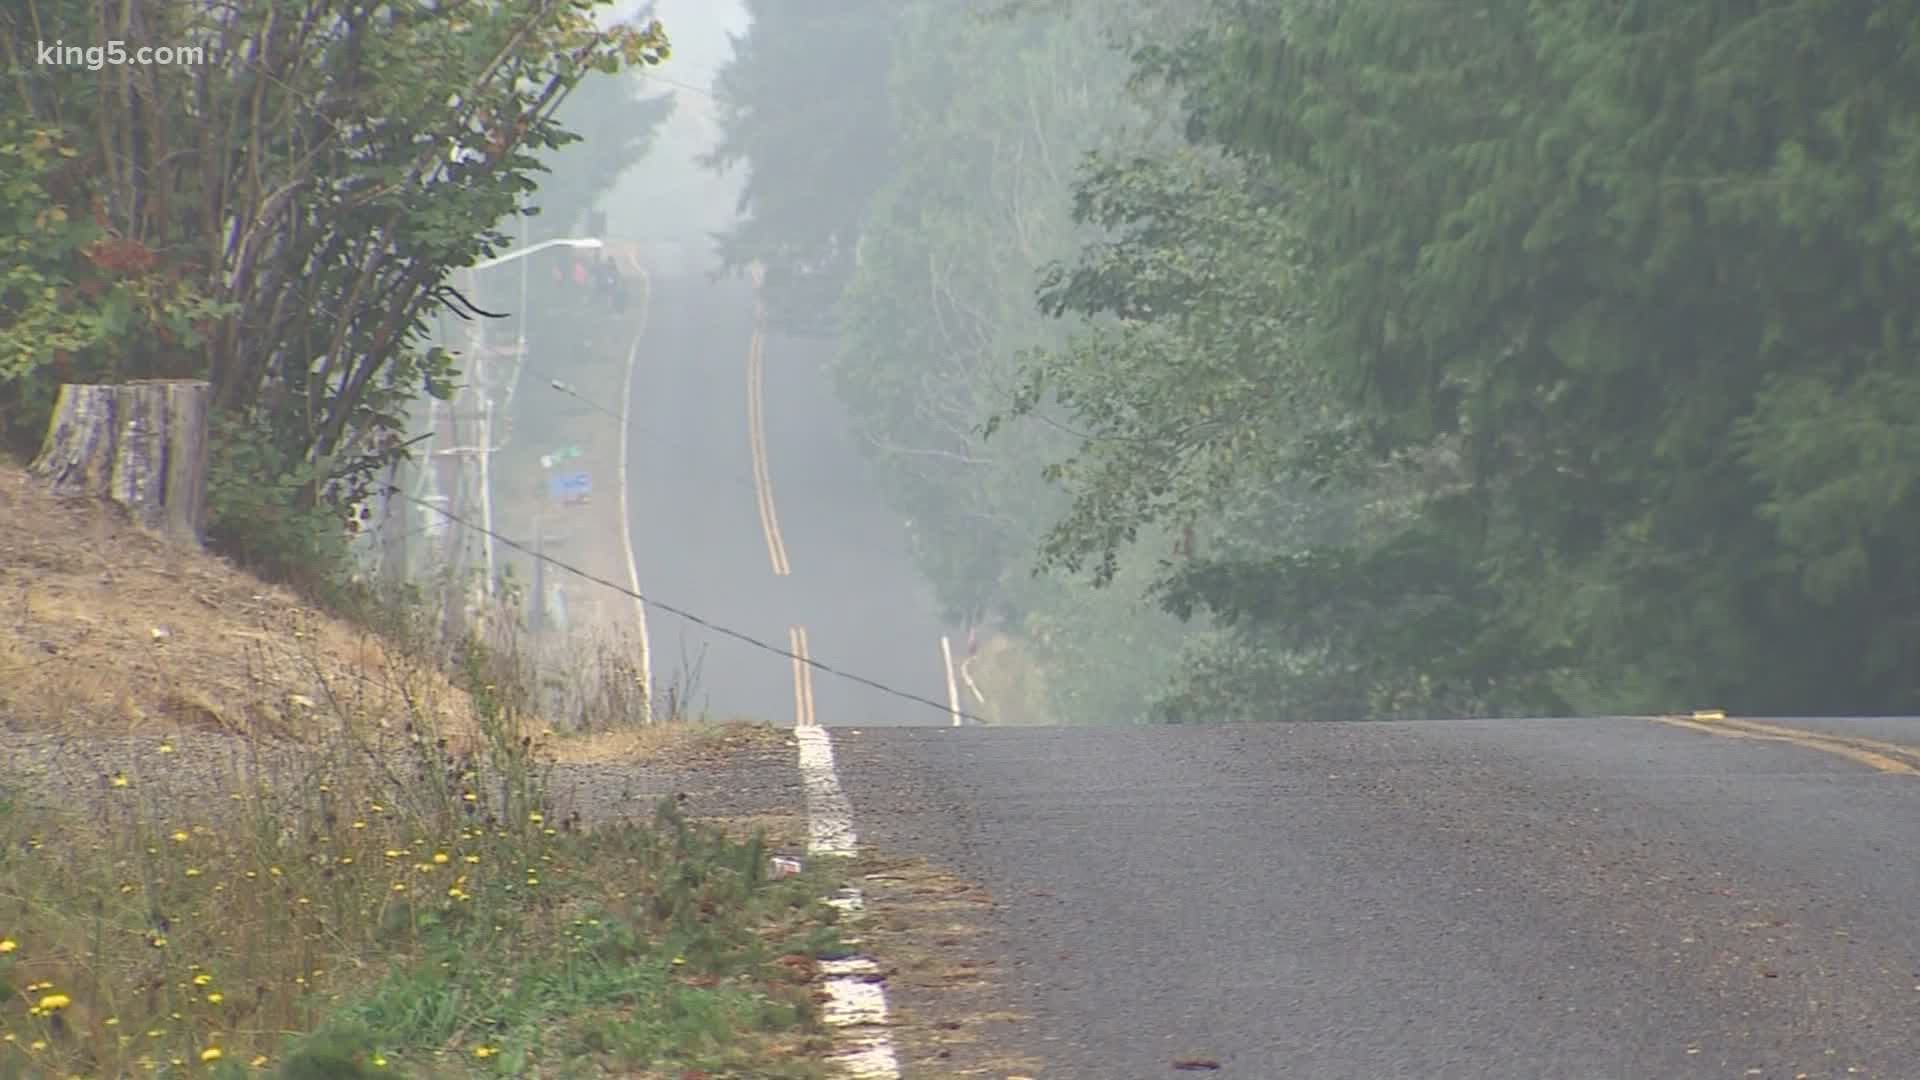 East Pierce Fire Chief Bud Backer described the week as "chaotic" and said reduced winds and higher humidity on Sunday gave them a chance to better survey the size.